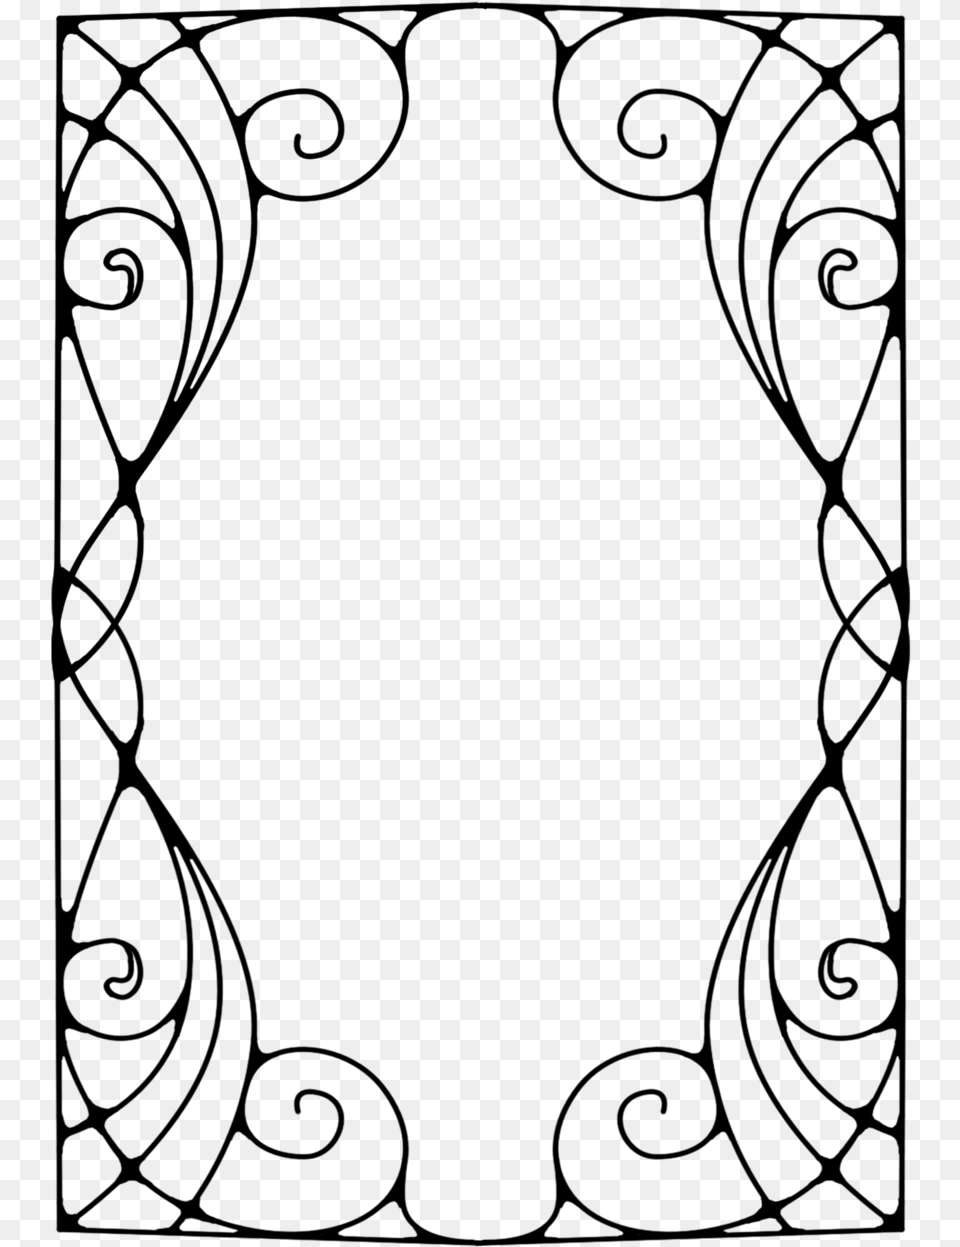 Nouveau Frame 12 By Tigers Stock On Clipart Library Art Nouveau Frame, Gray Png Image